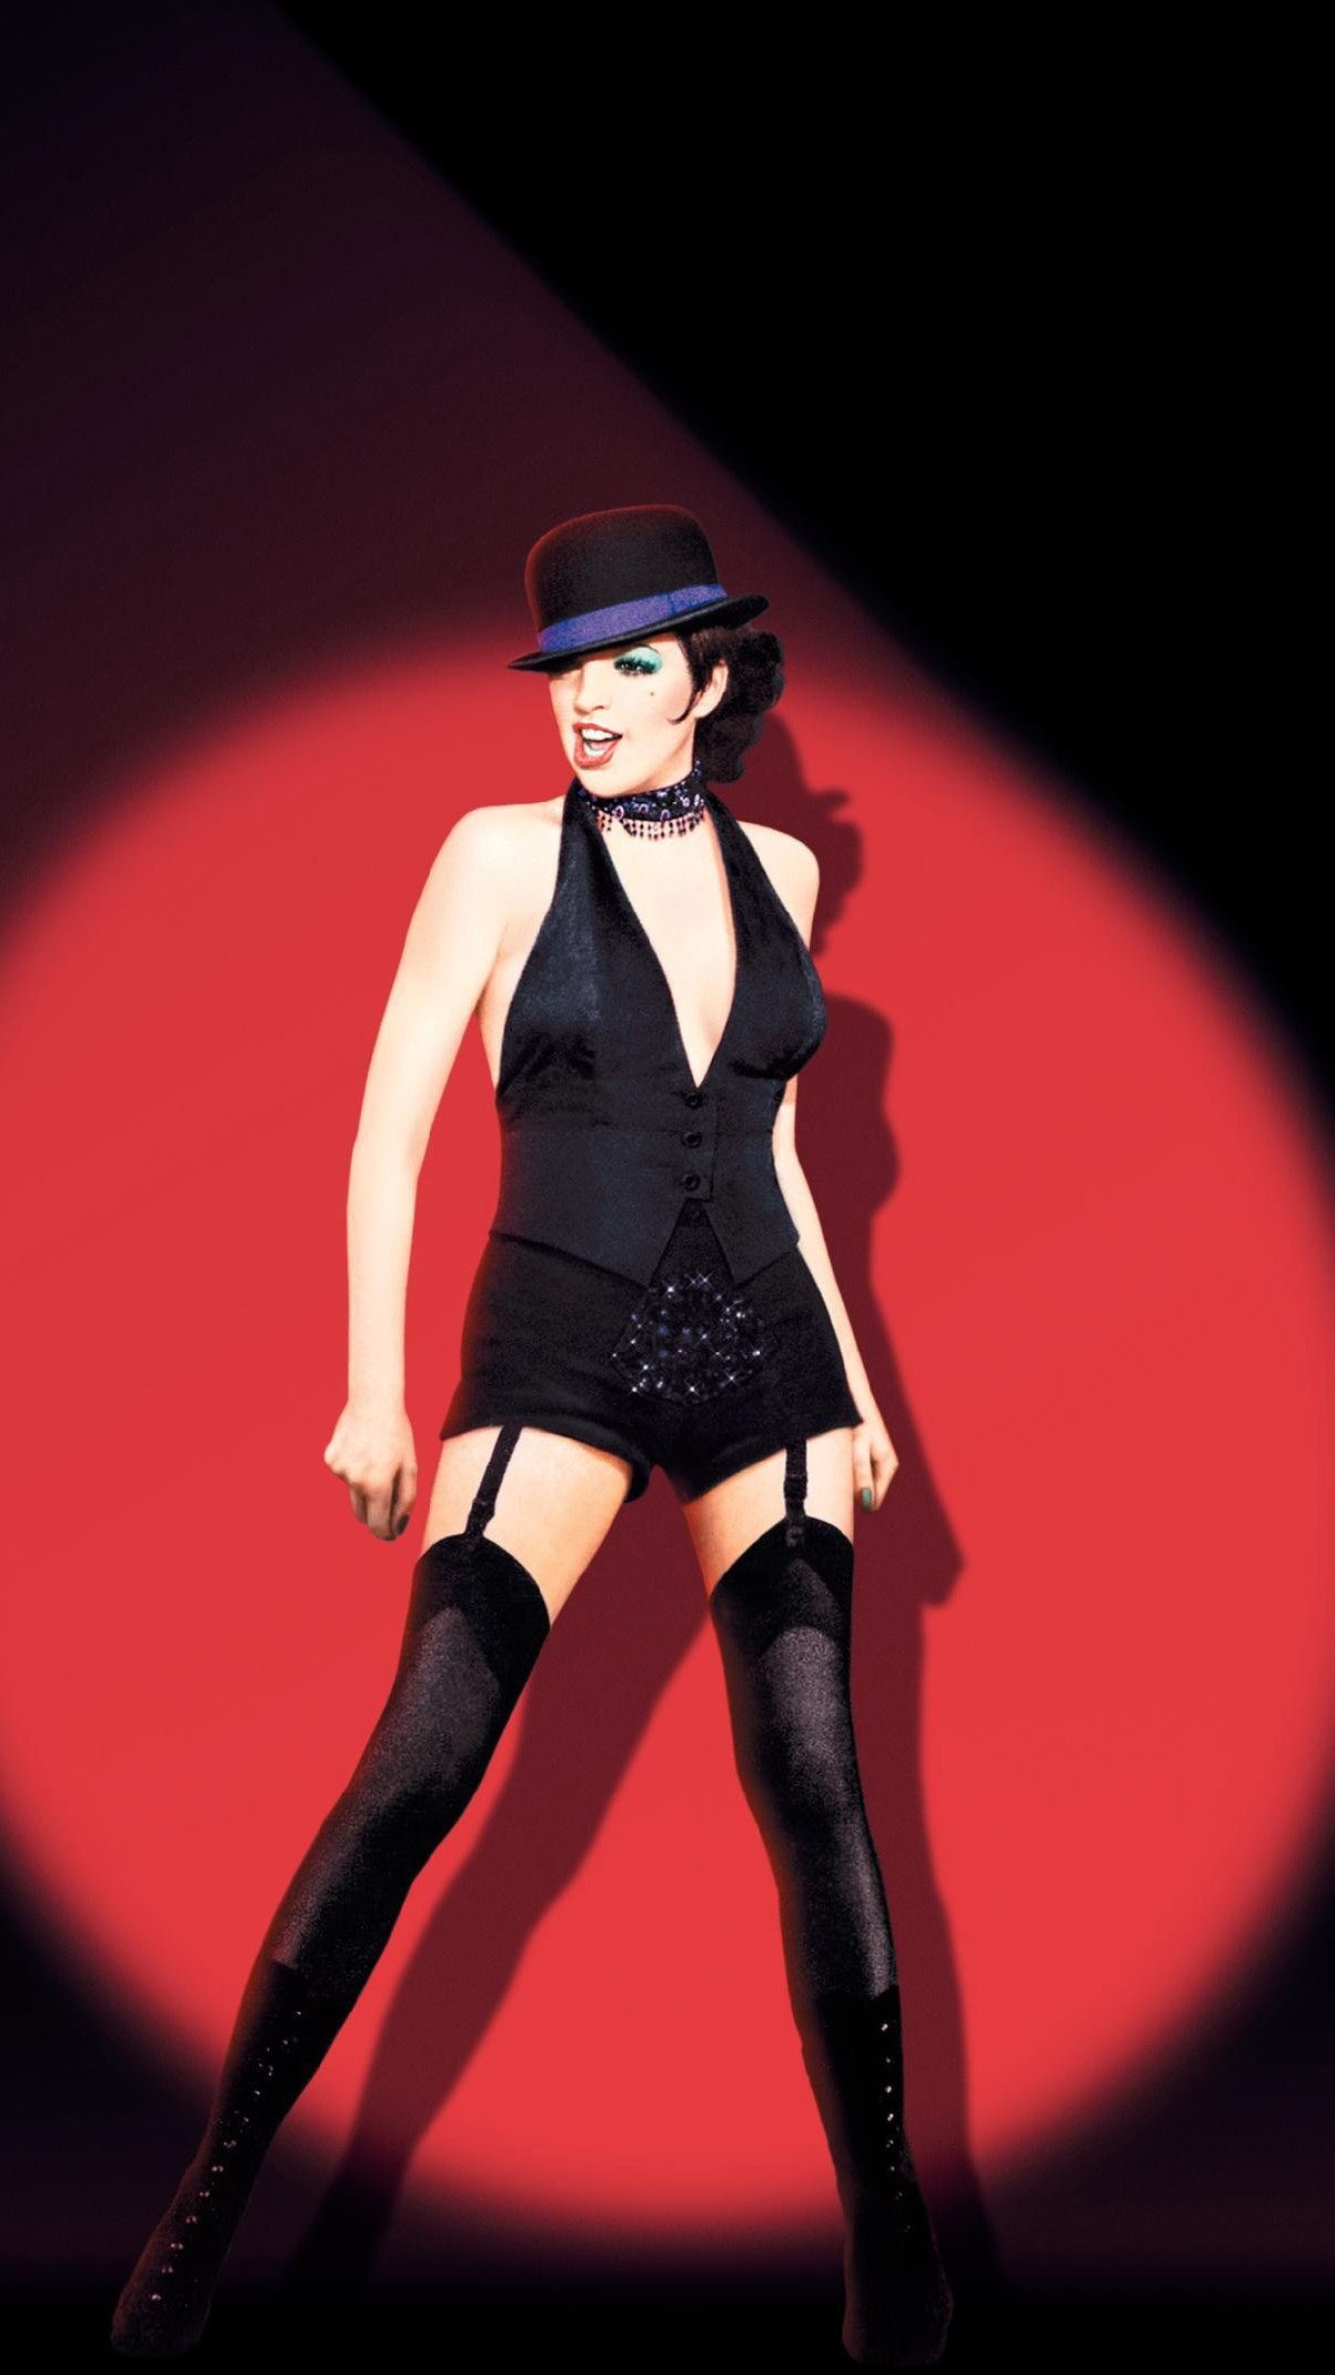 Cabaret: 1972 movie, Liza Minnelli as Sally Bowles, Directed by Bob Fosse. 1340x2380 HD Wallpaper.